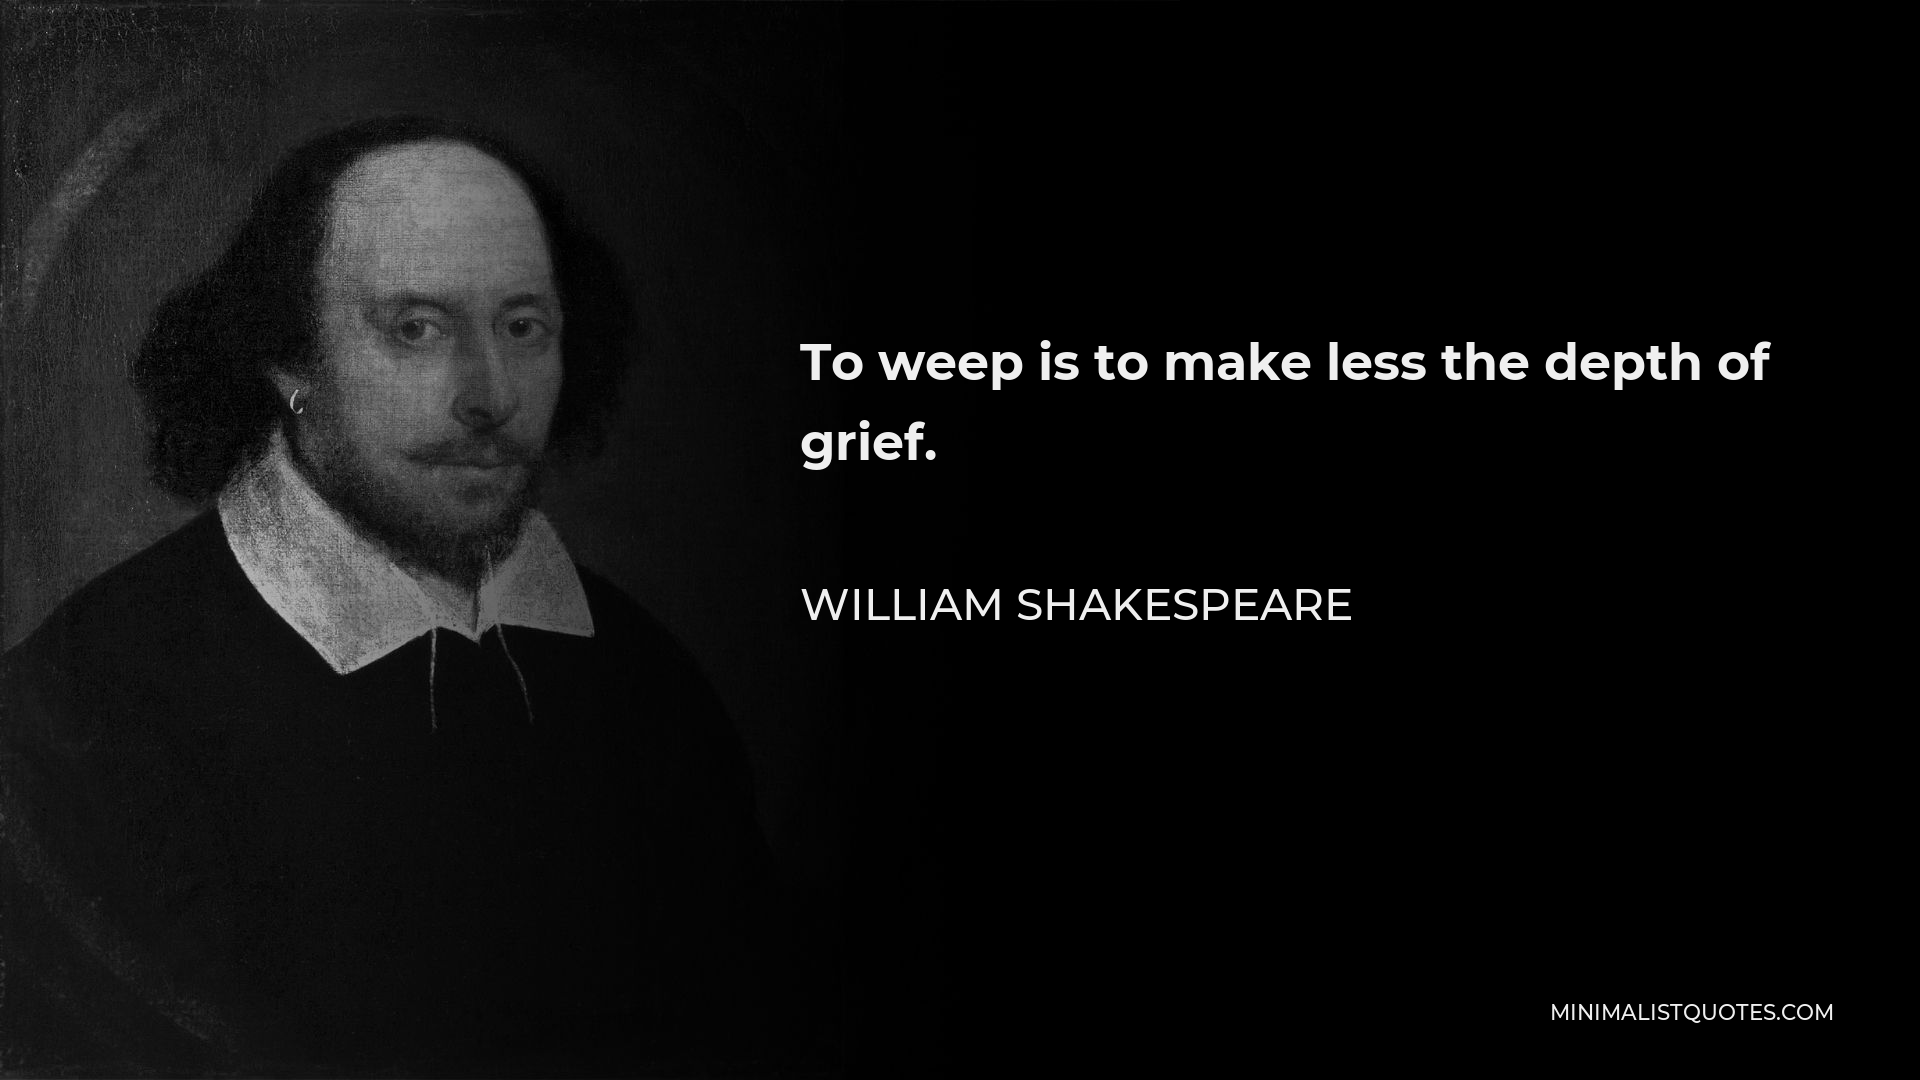 William Shakespeare Quote: To weep is to make less the depth of grief.